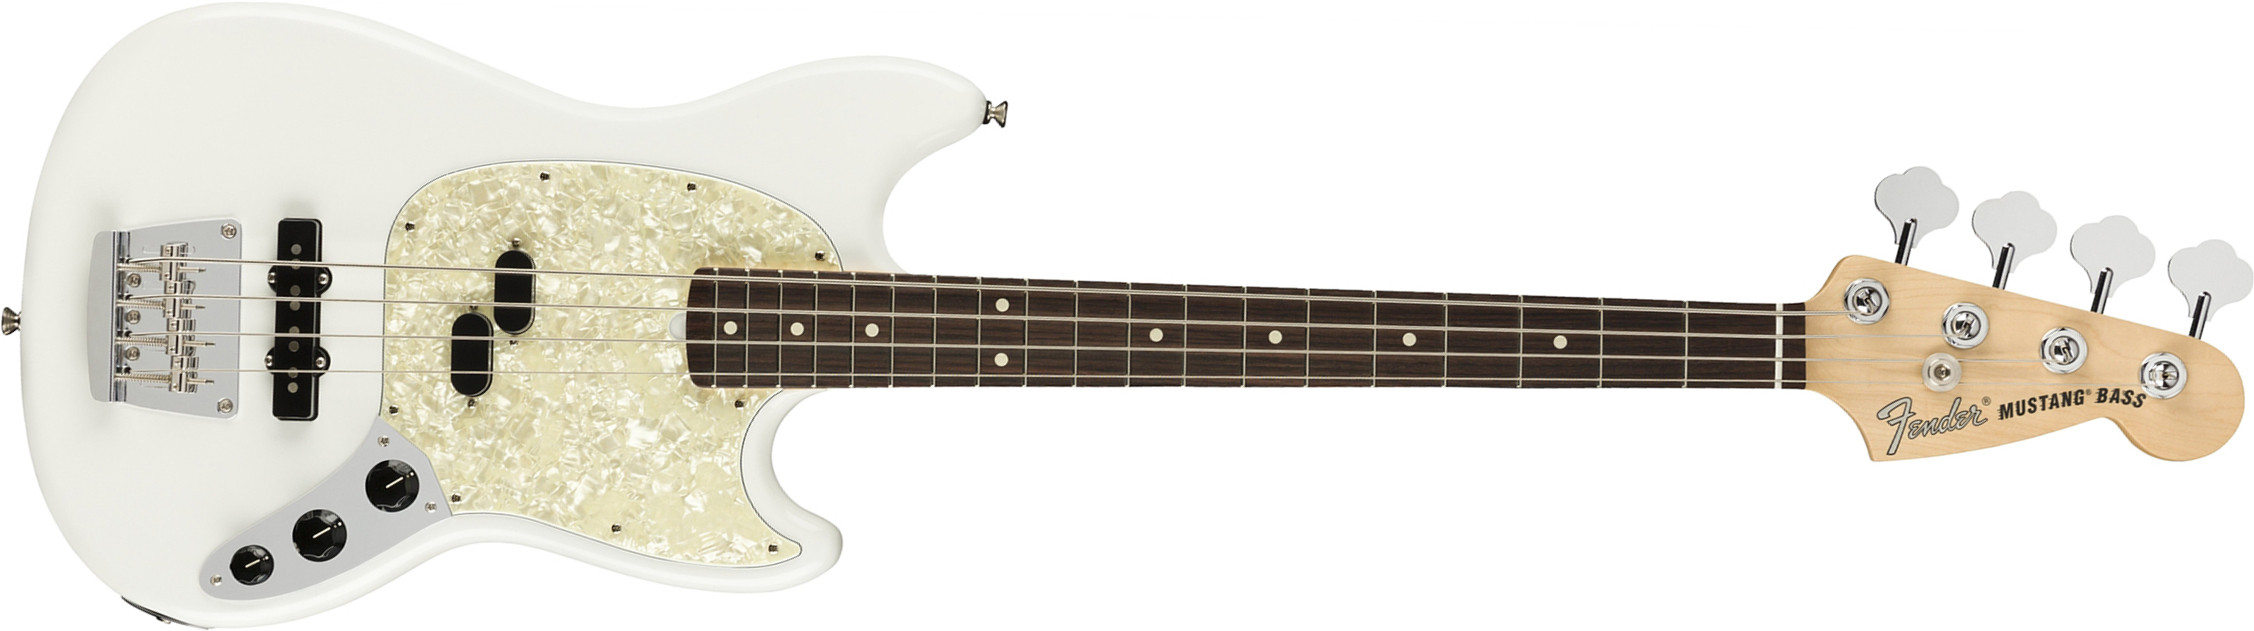 Fender Mustang Bass American Performer Usa Rw - Arctic White - Electric bass for kids - Main picture